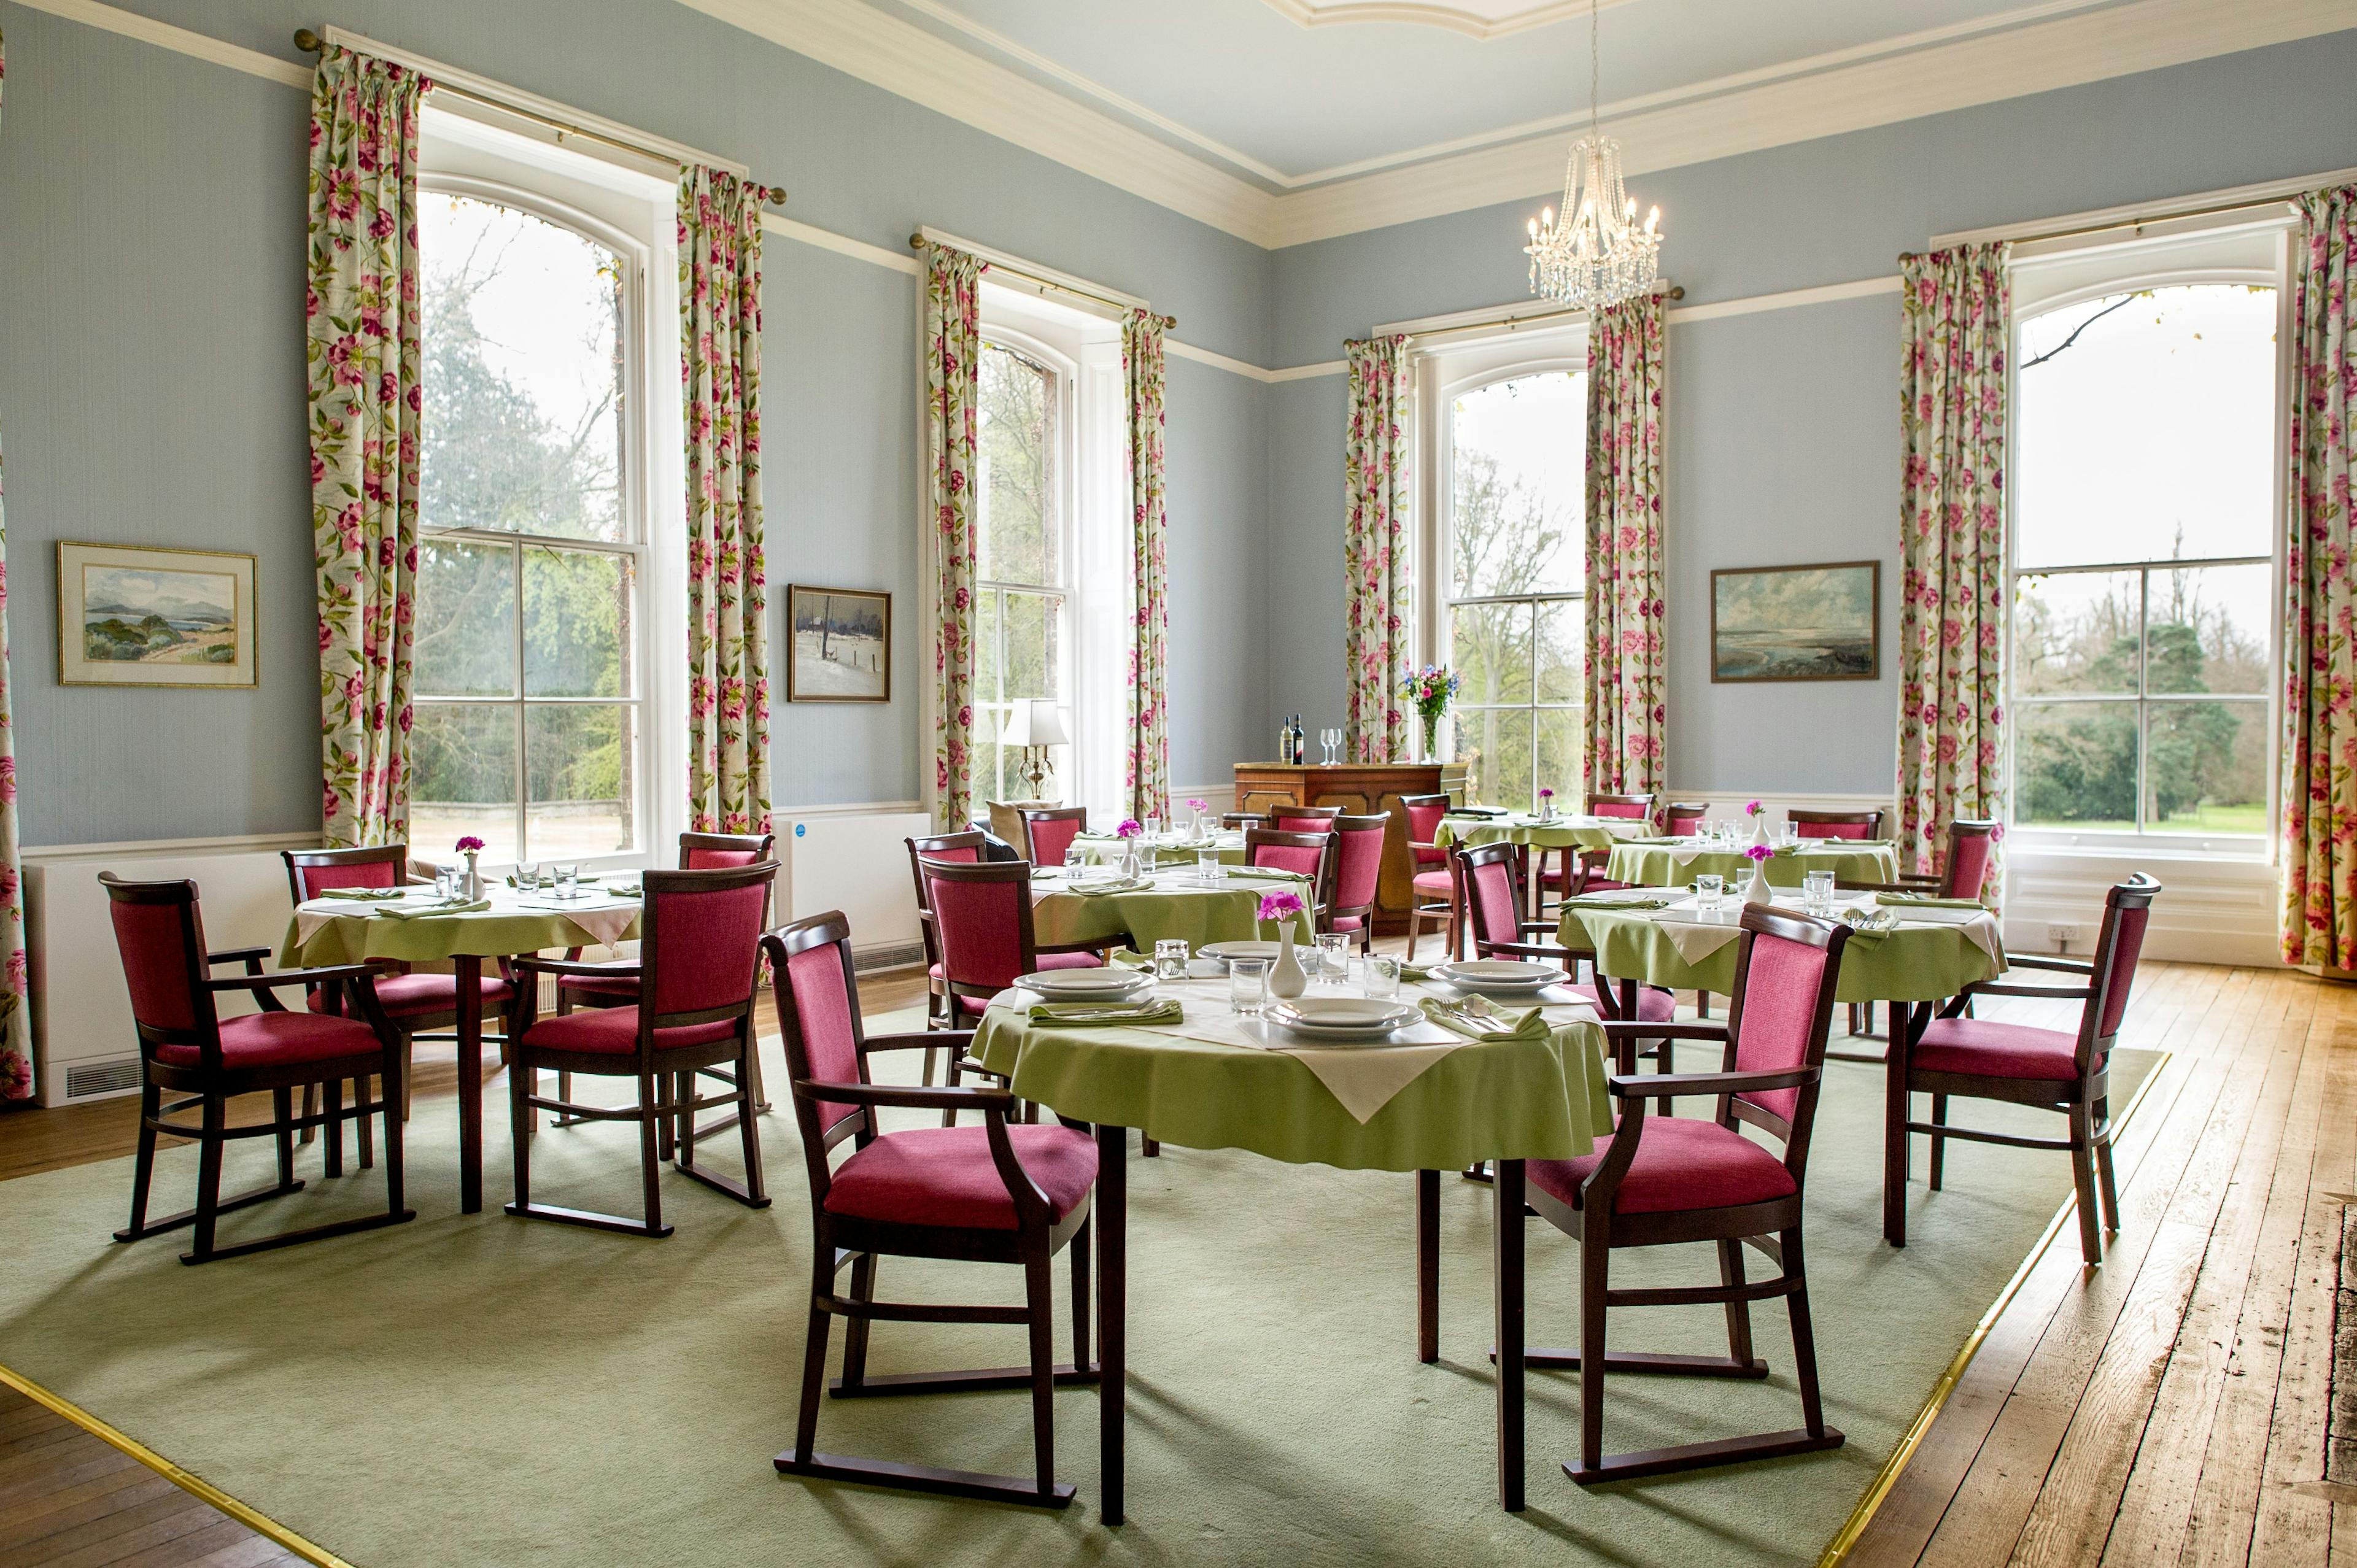 Dining room of Stowlangtoft Hall in Bury St Edmunds, Suffolk